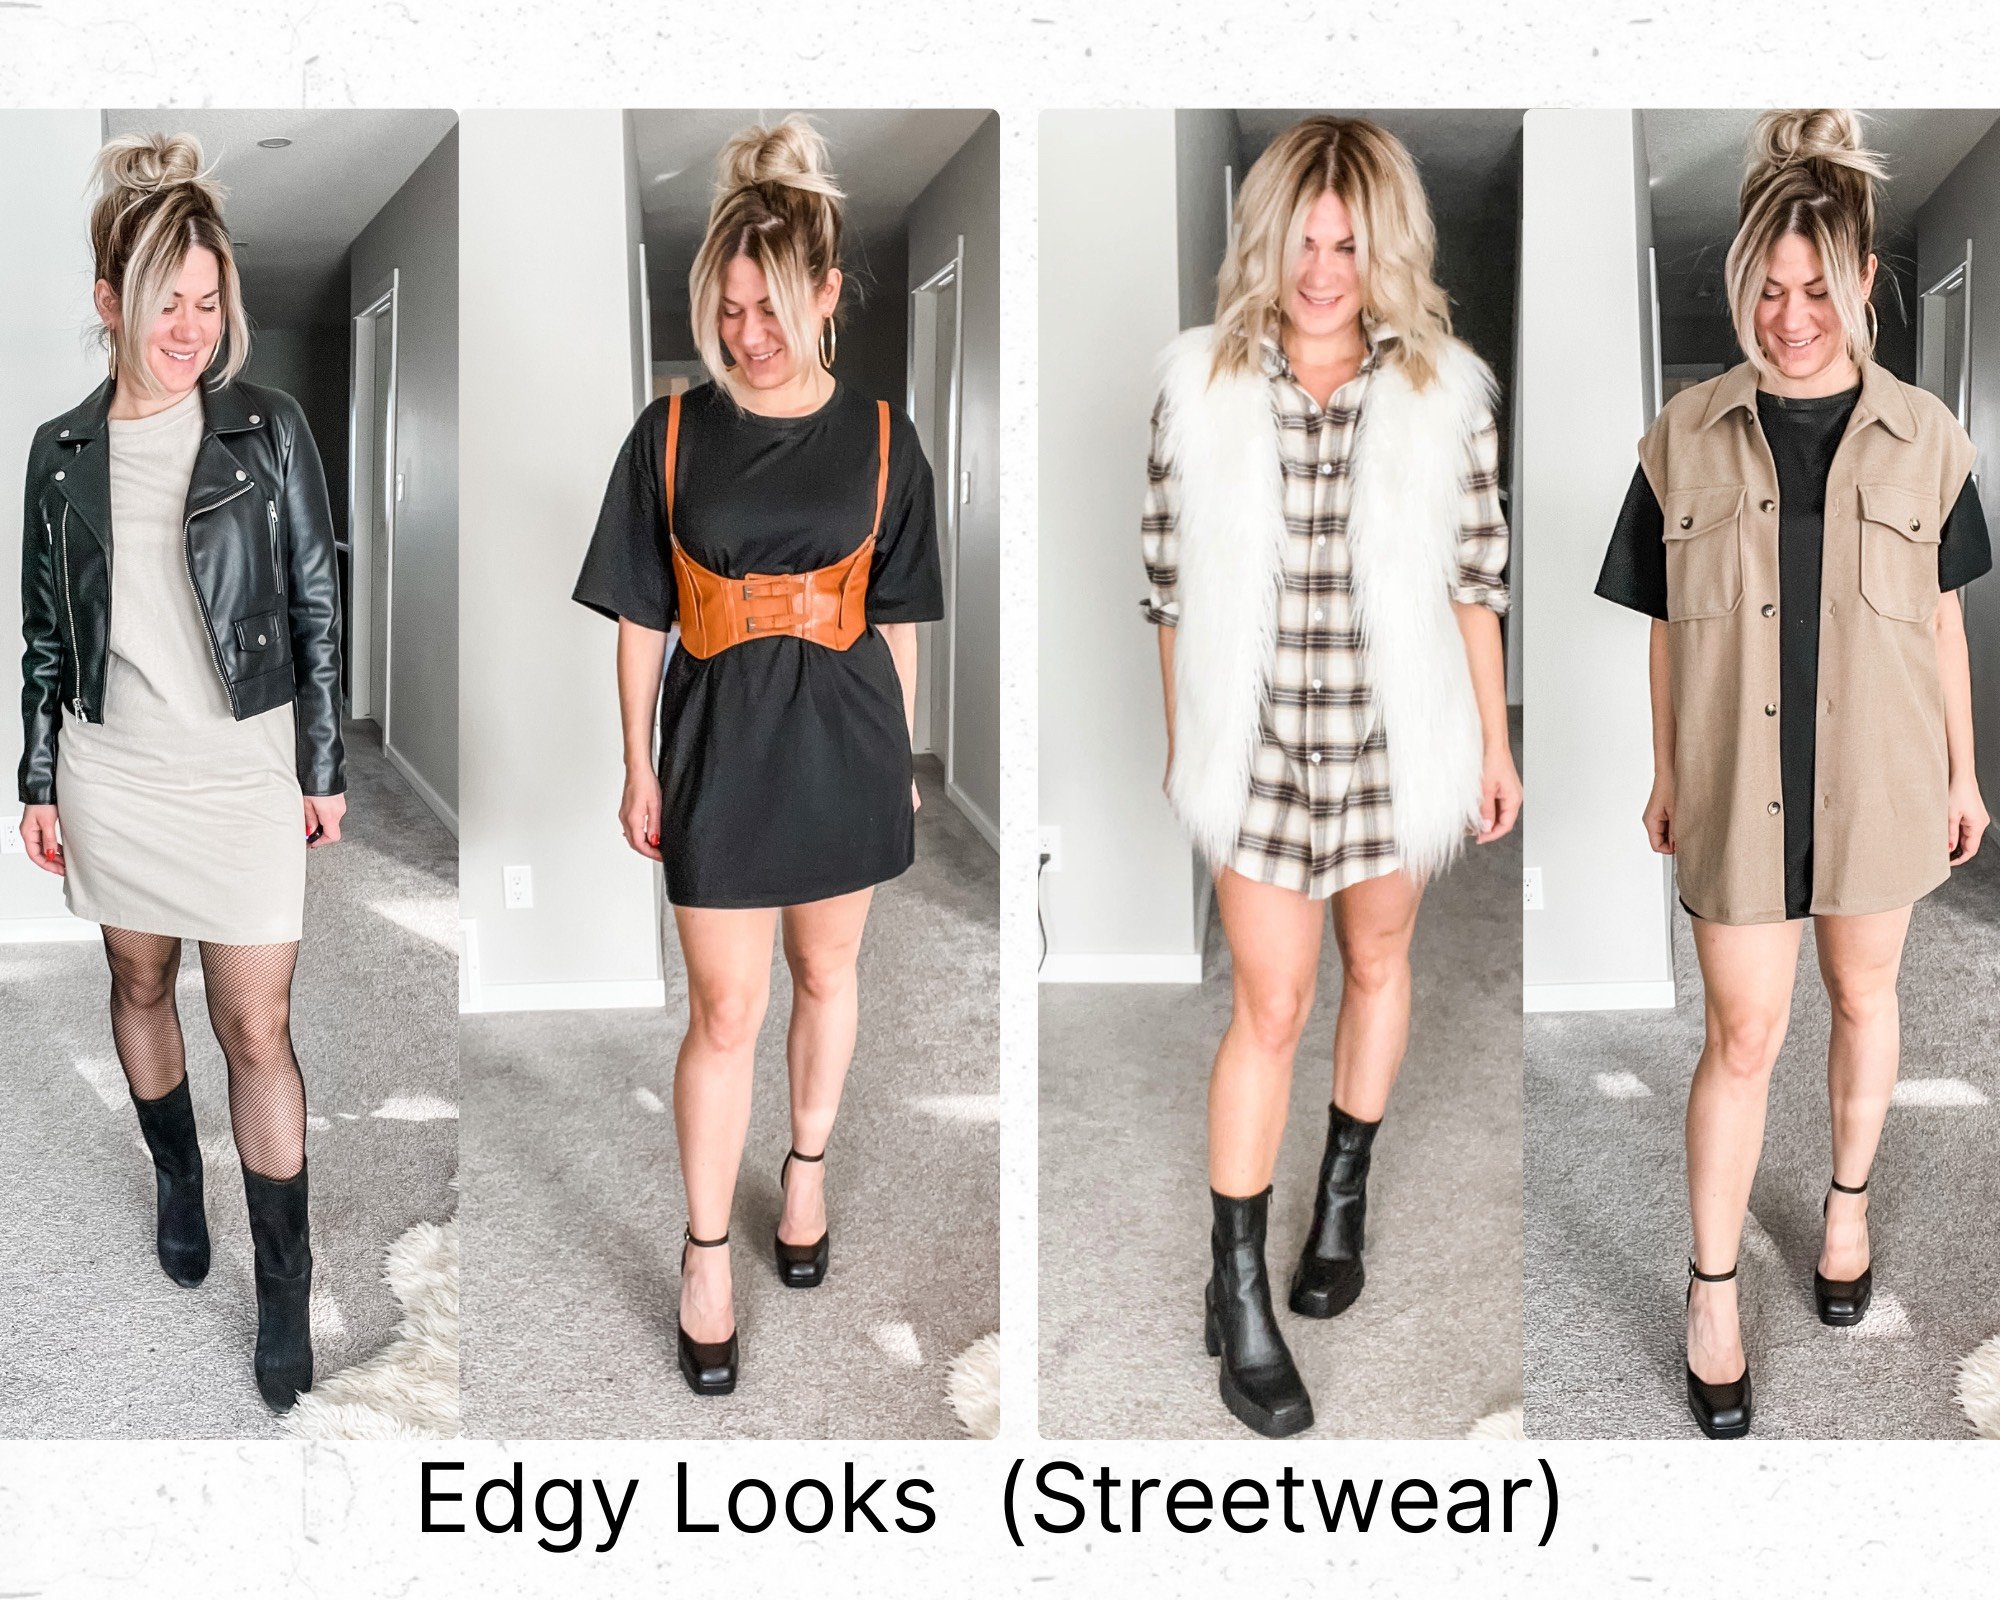 WHAT MAKES A LOOK EDGY!?